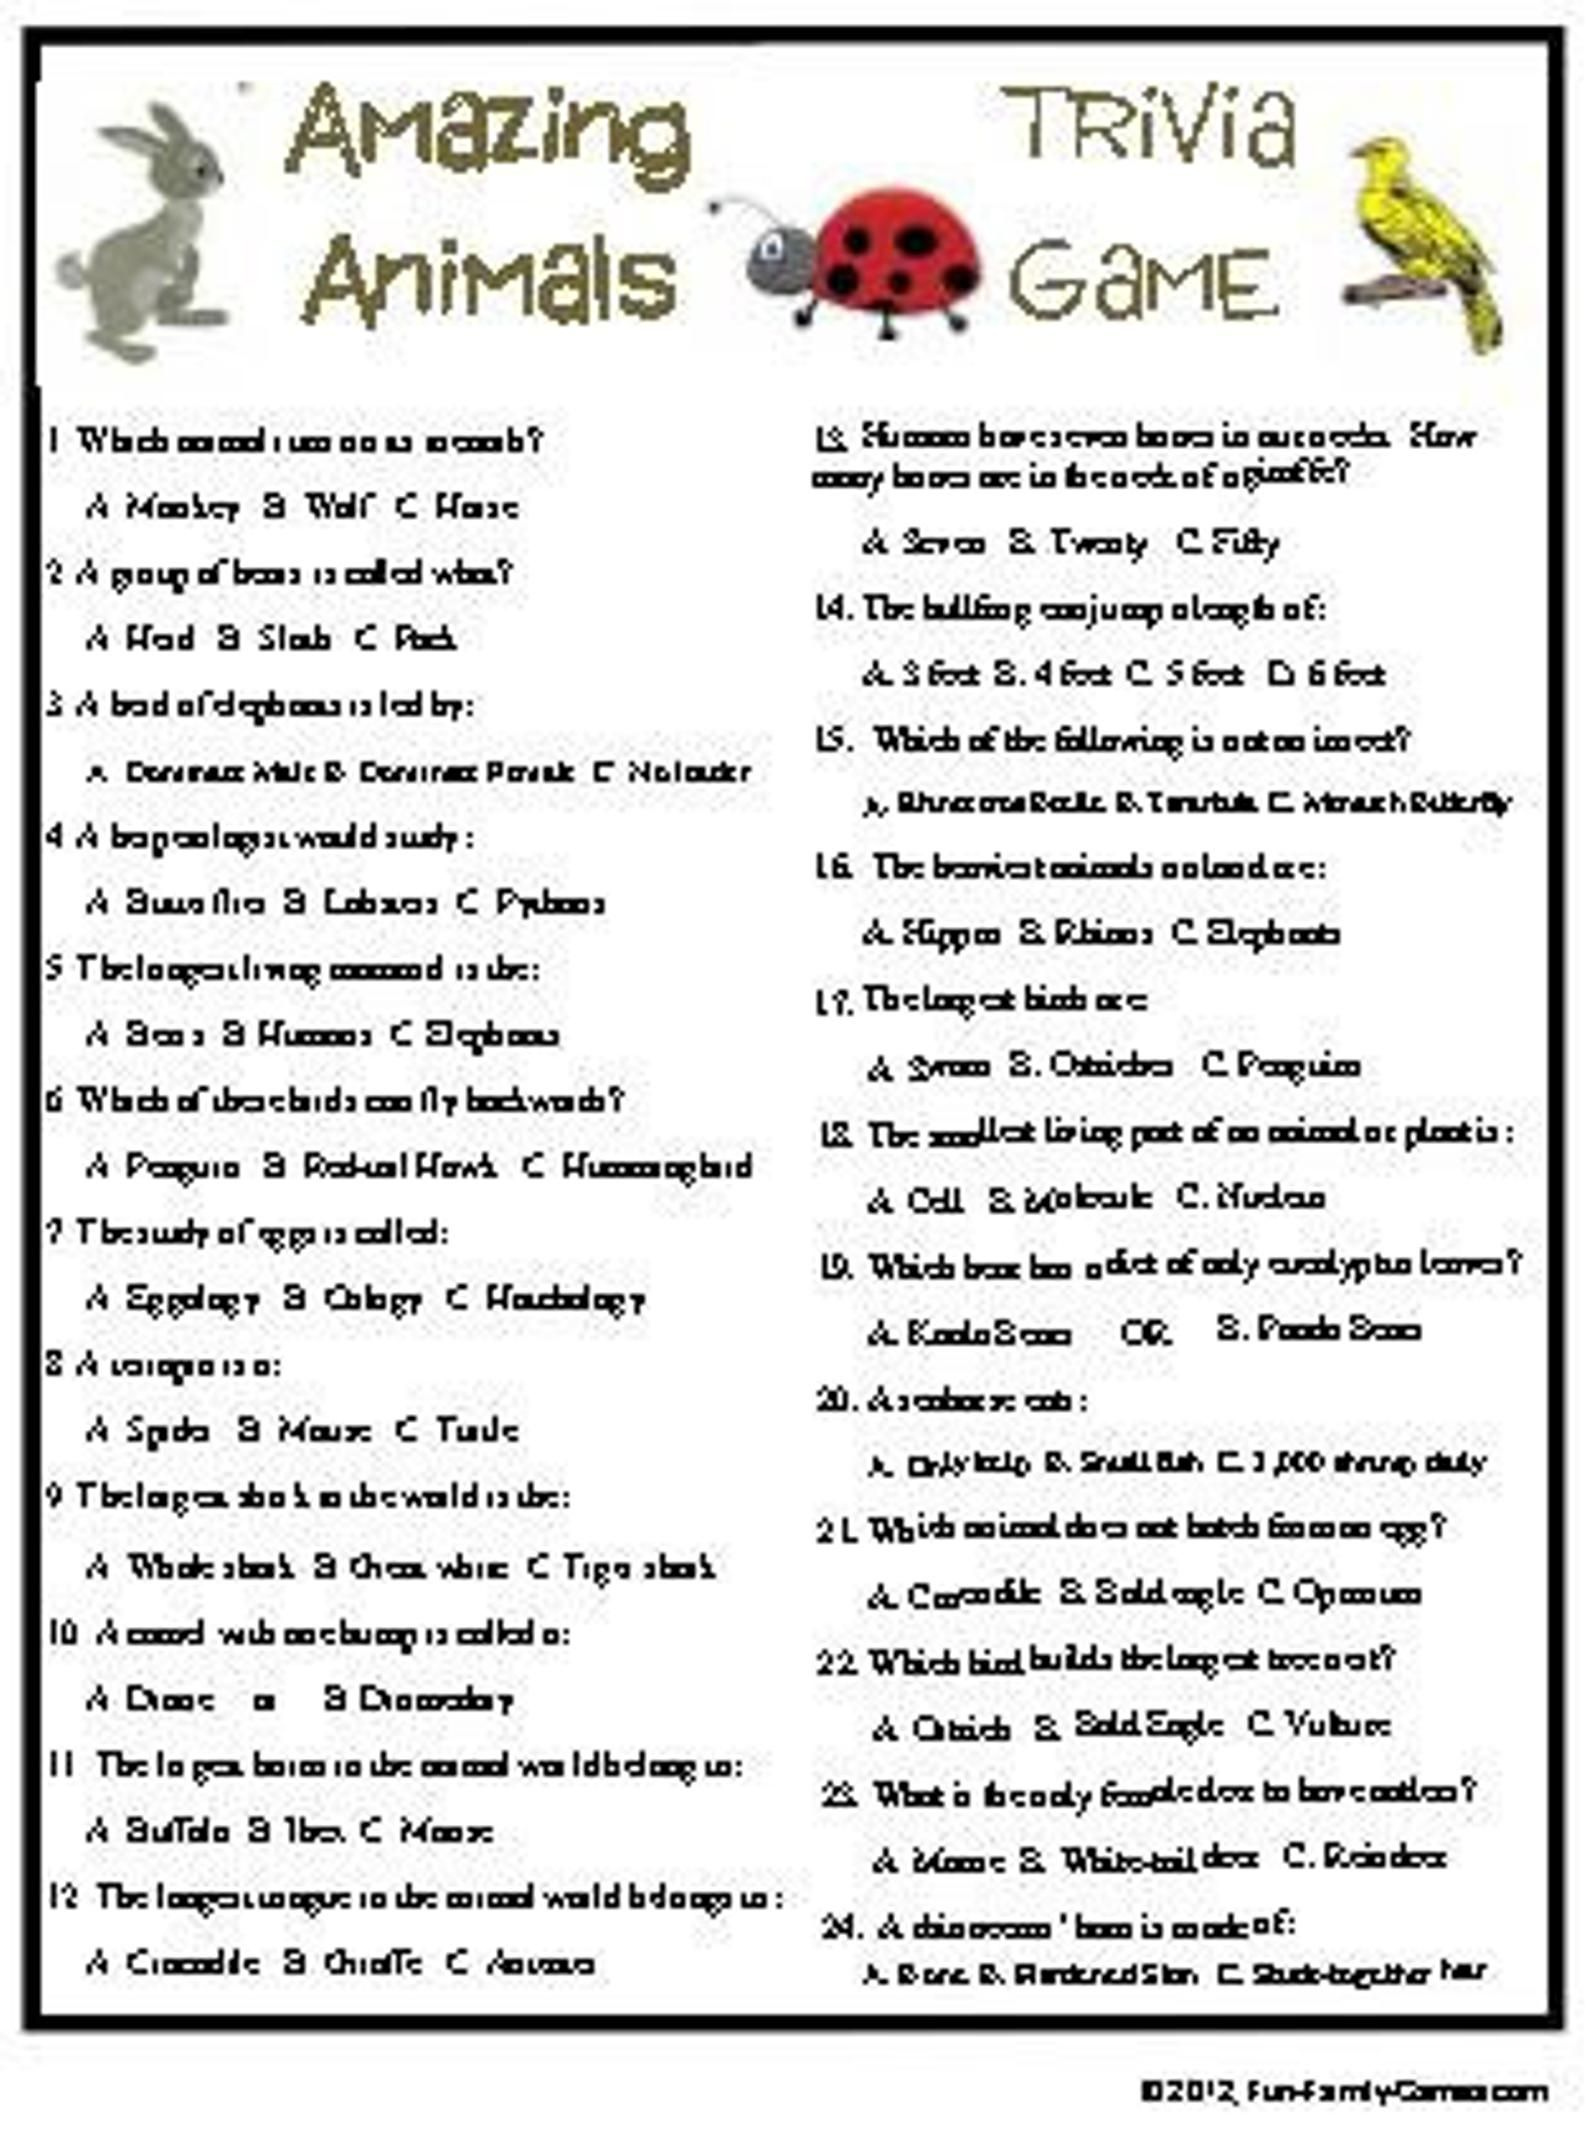 Easy Animal Trivia Questions And Answers